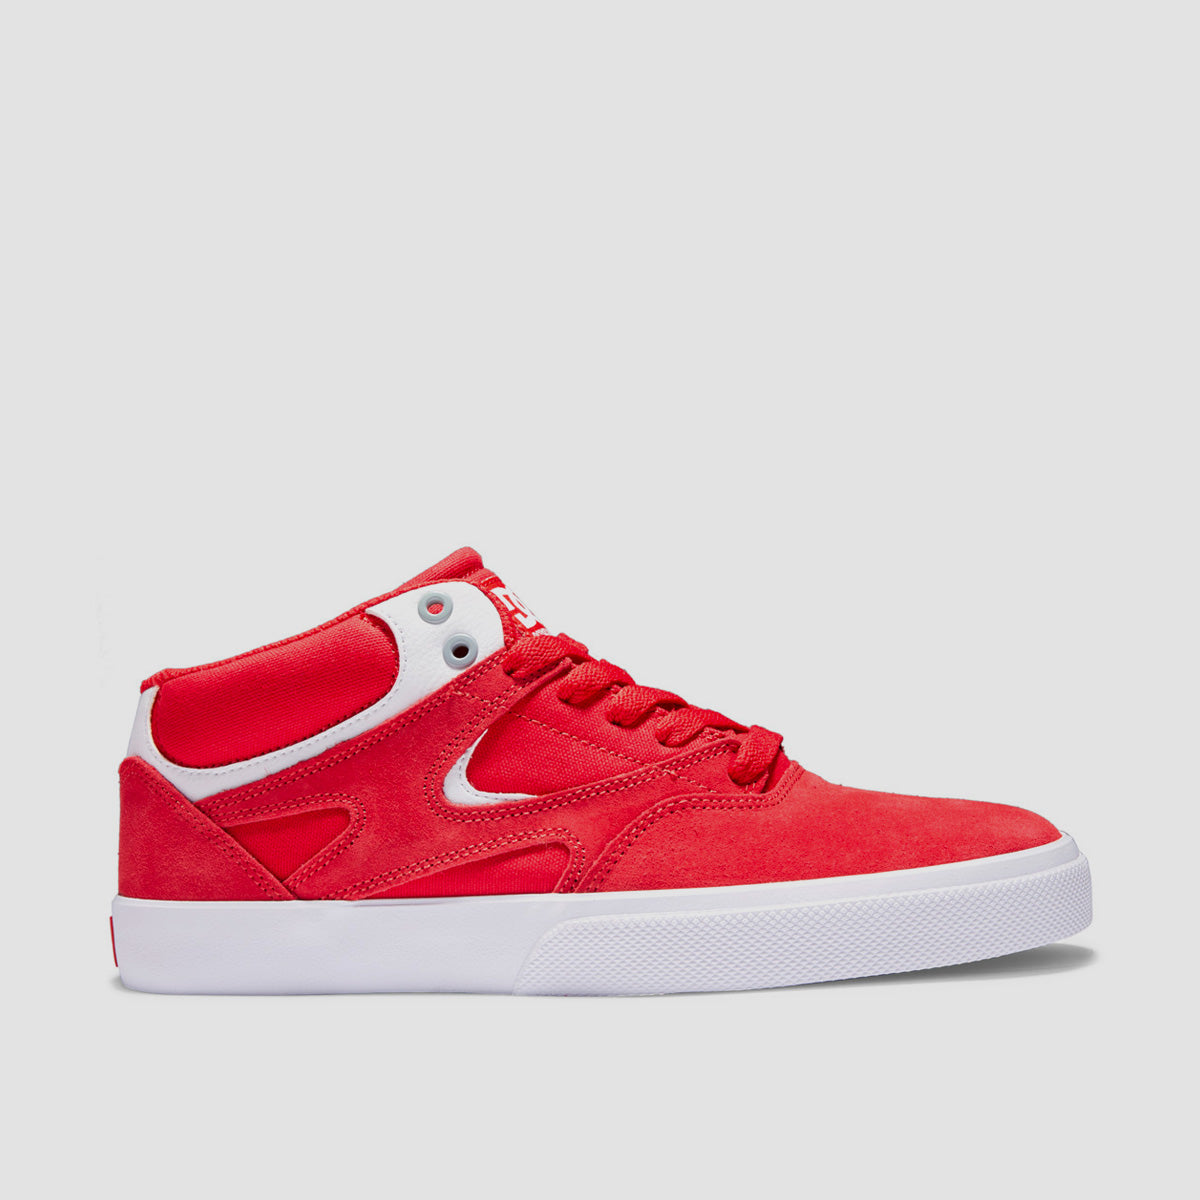 DC Kalis Vulc Mid S Shoes - Athletic Red